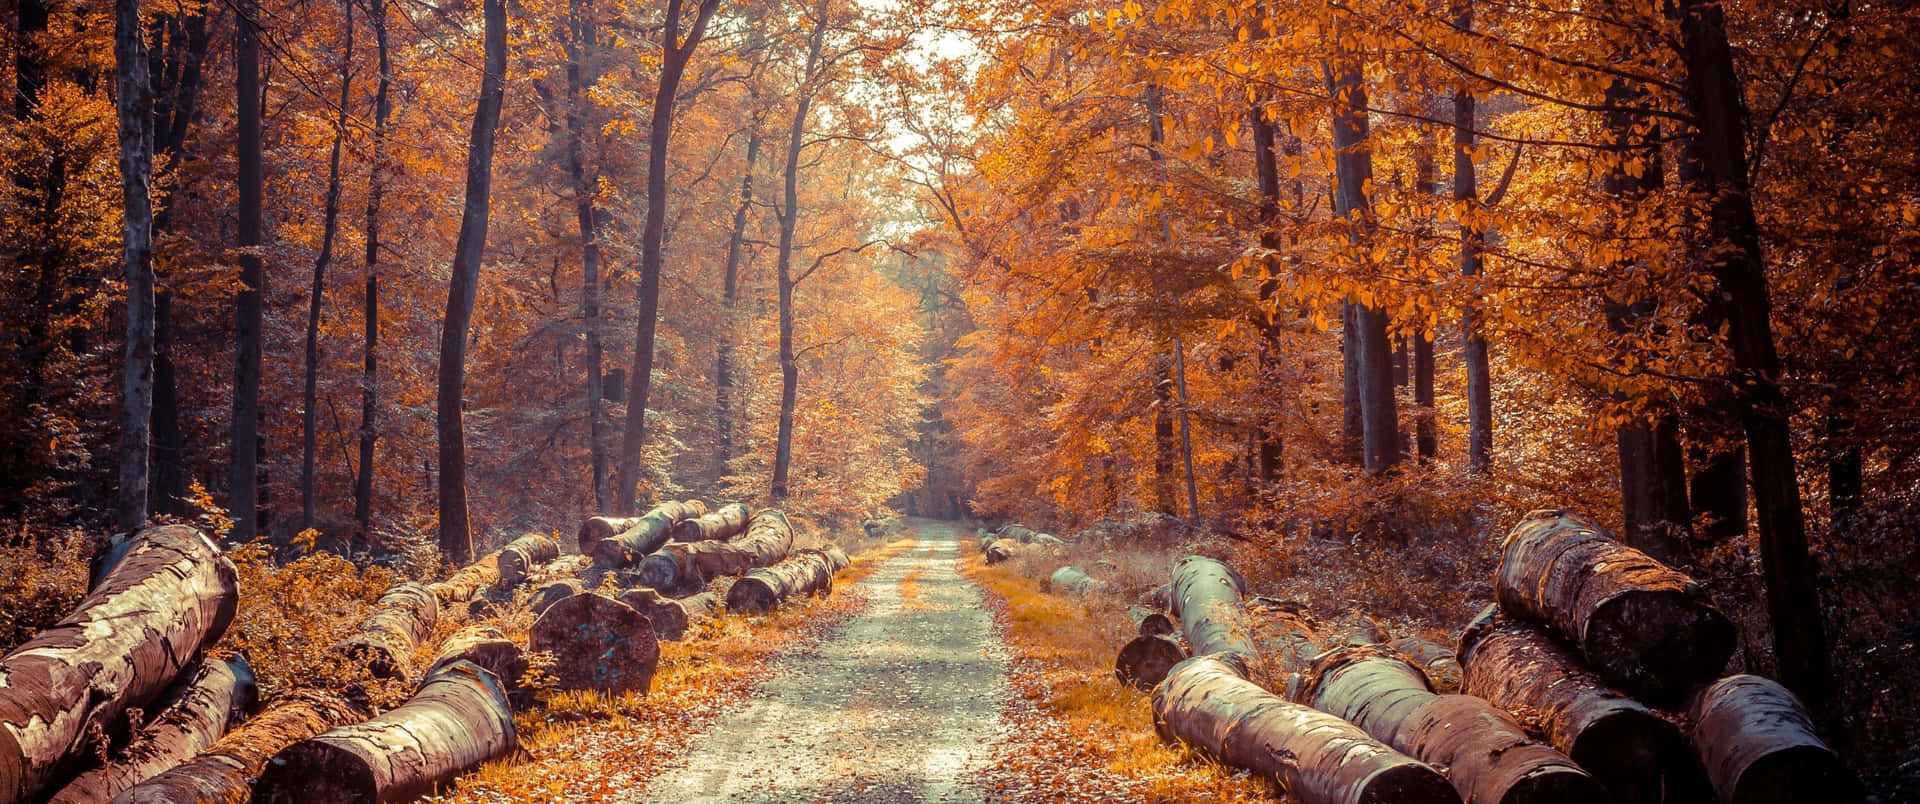 Enjoy the vibrant colors of autumn with this 3440x1440 fall wallpaper Wallpaper